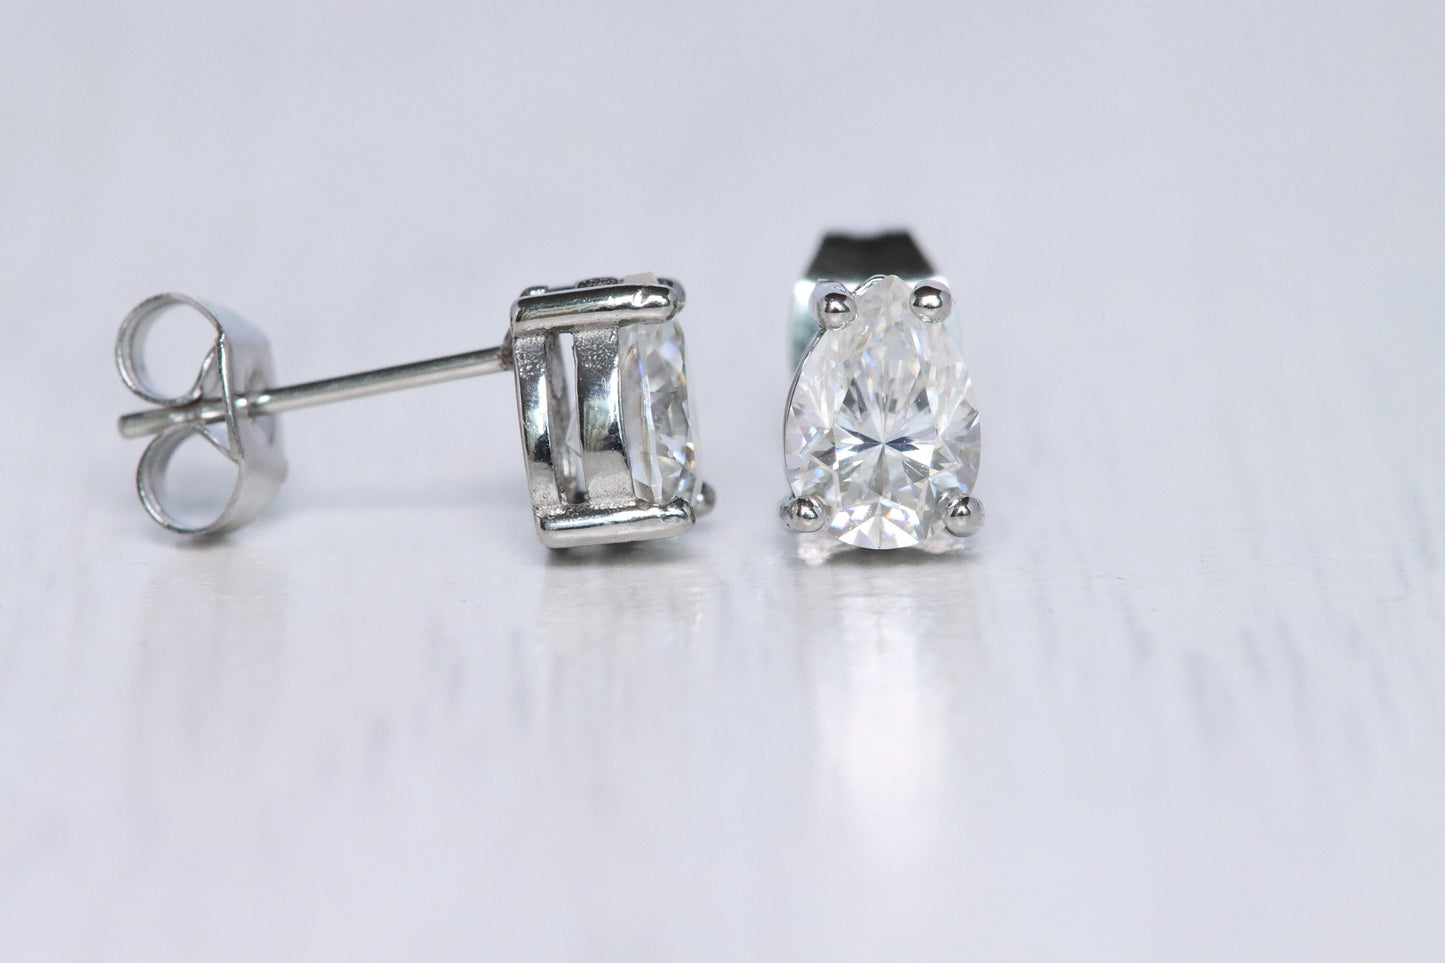 GENUINE Pear Cut Moissanite stud earrings, available in titanium, white gold and surgical steel